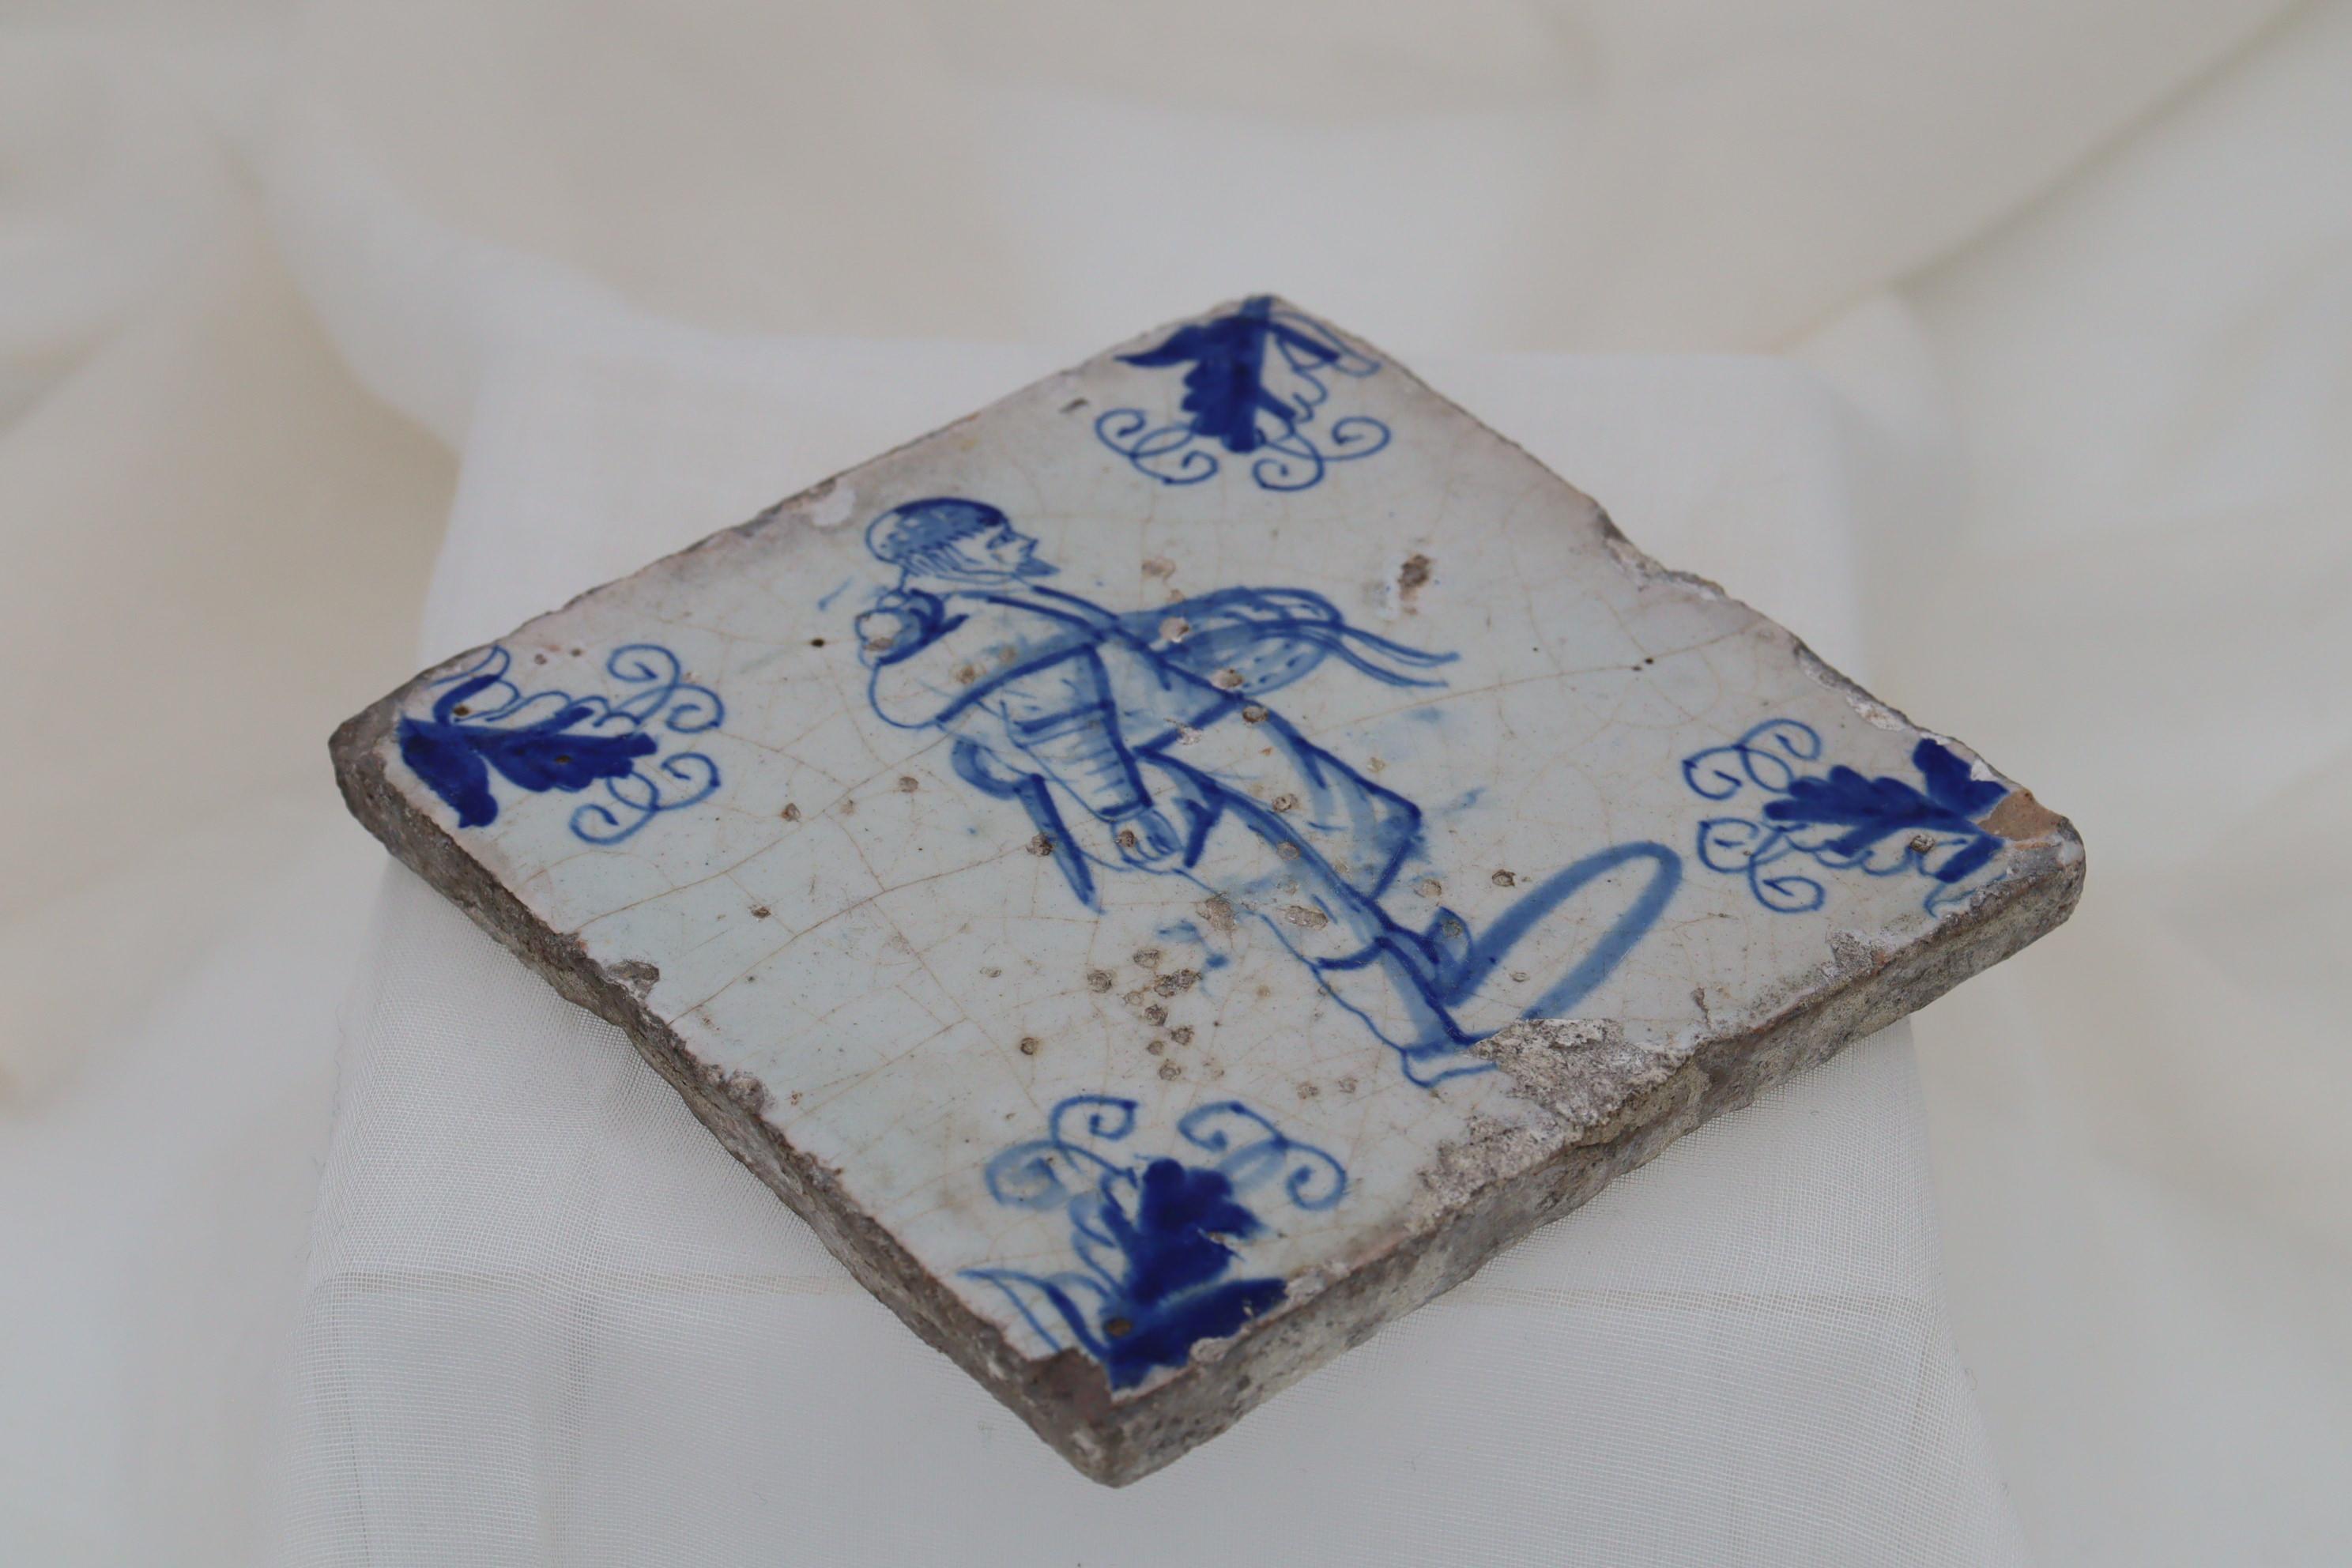 17th Century Dutch hand painted delft tile In Fair Condition For Sale In East Geelong, VIC